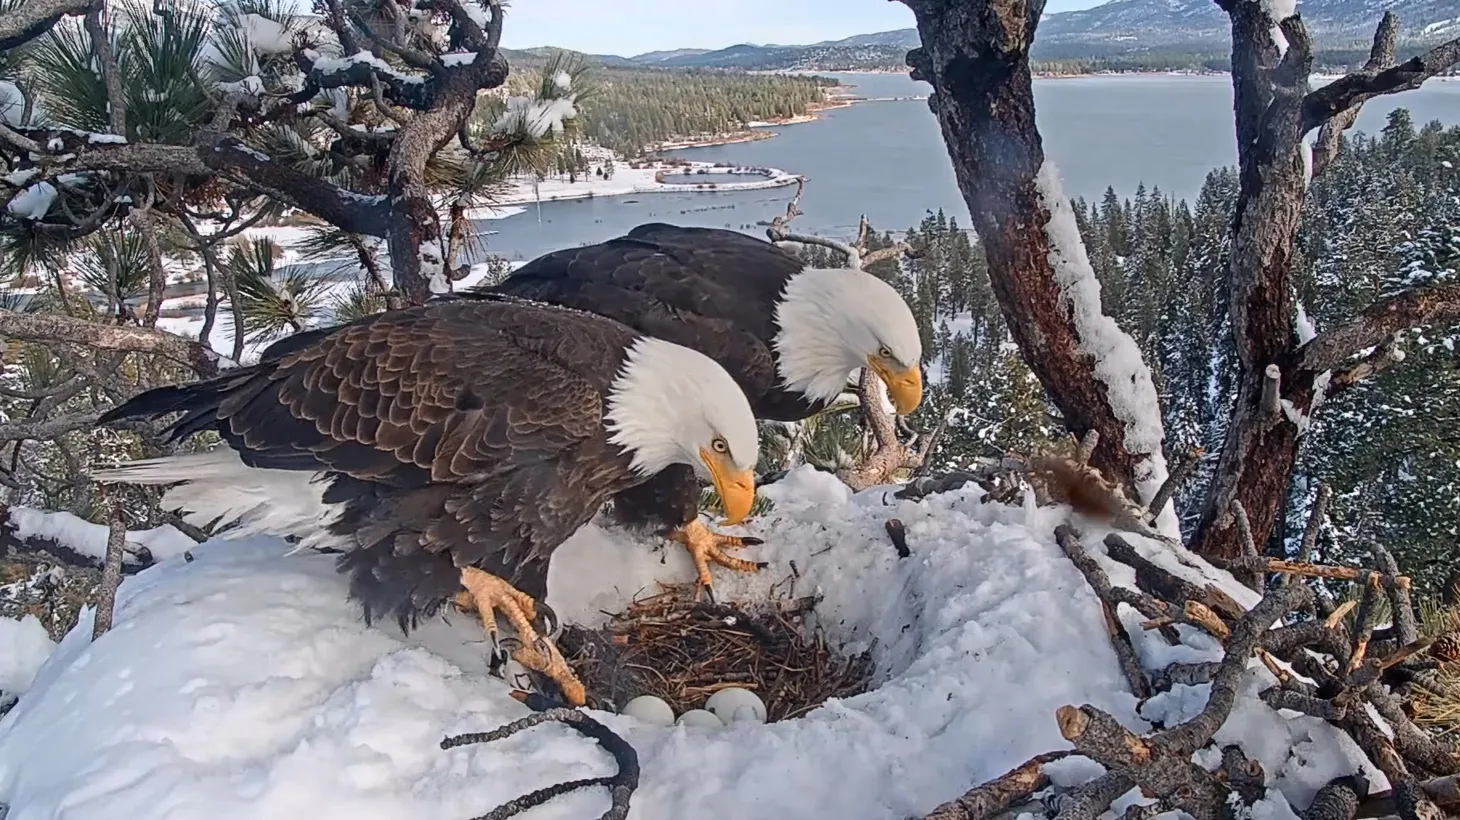 Bald eagle couple Jackie and Shadow are waiting for their three eaglets to hatch. Curious bird enthusiasts are following the journey via livestream.